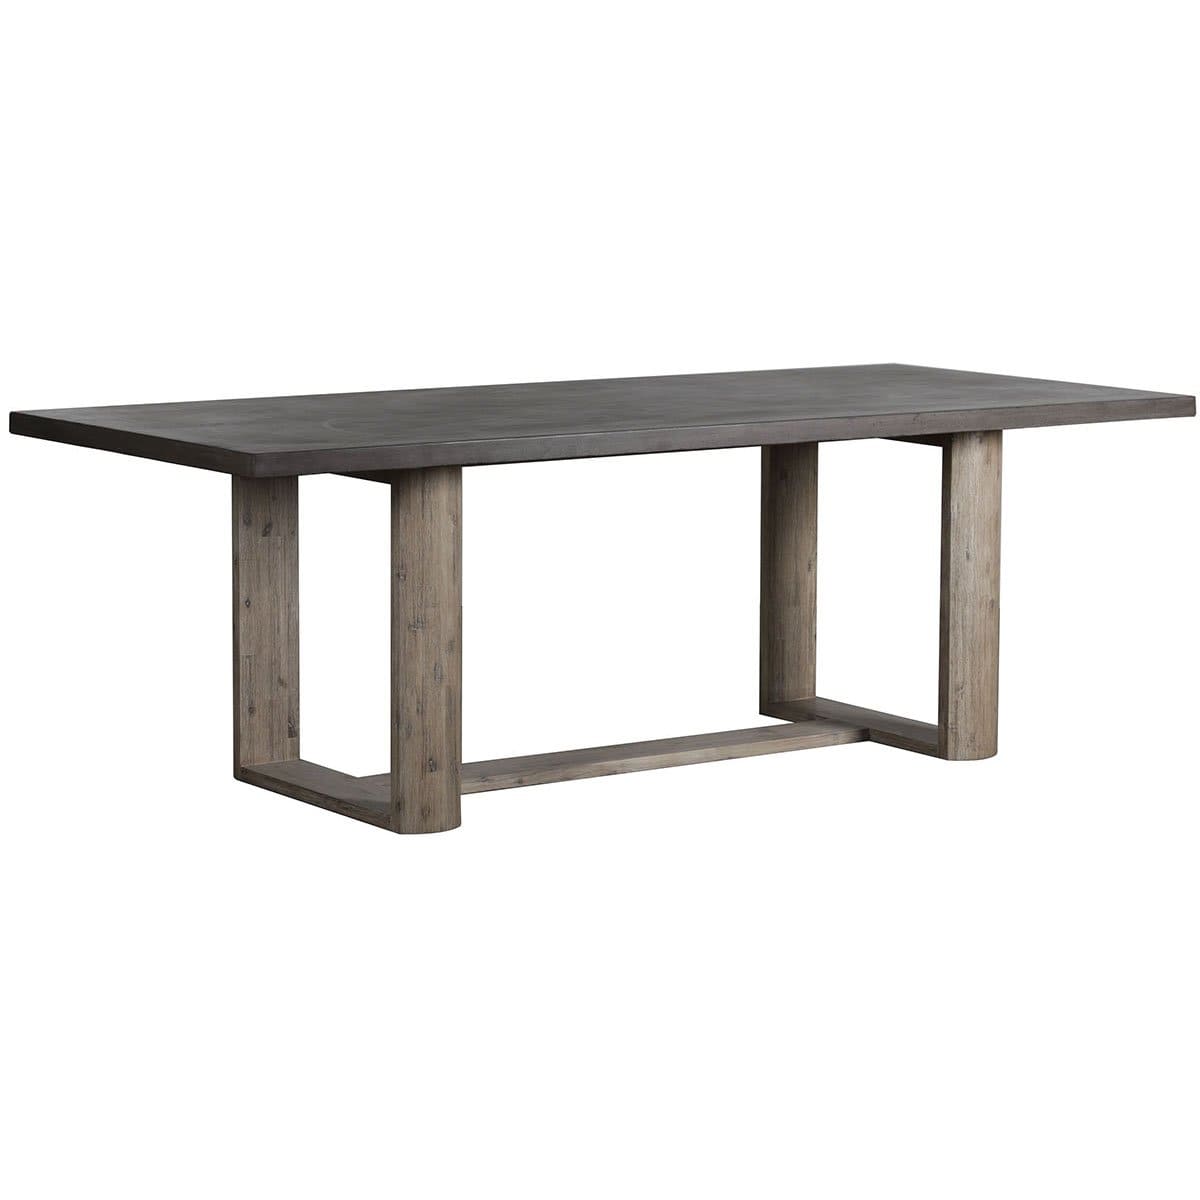 Dovetail Varza Rectangular Outdoor Dining Table Furniture dovetail-DOV24008